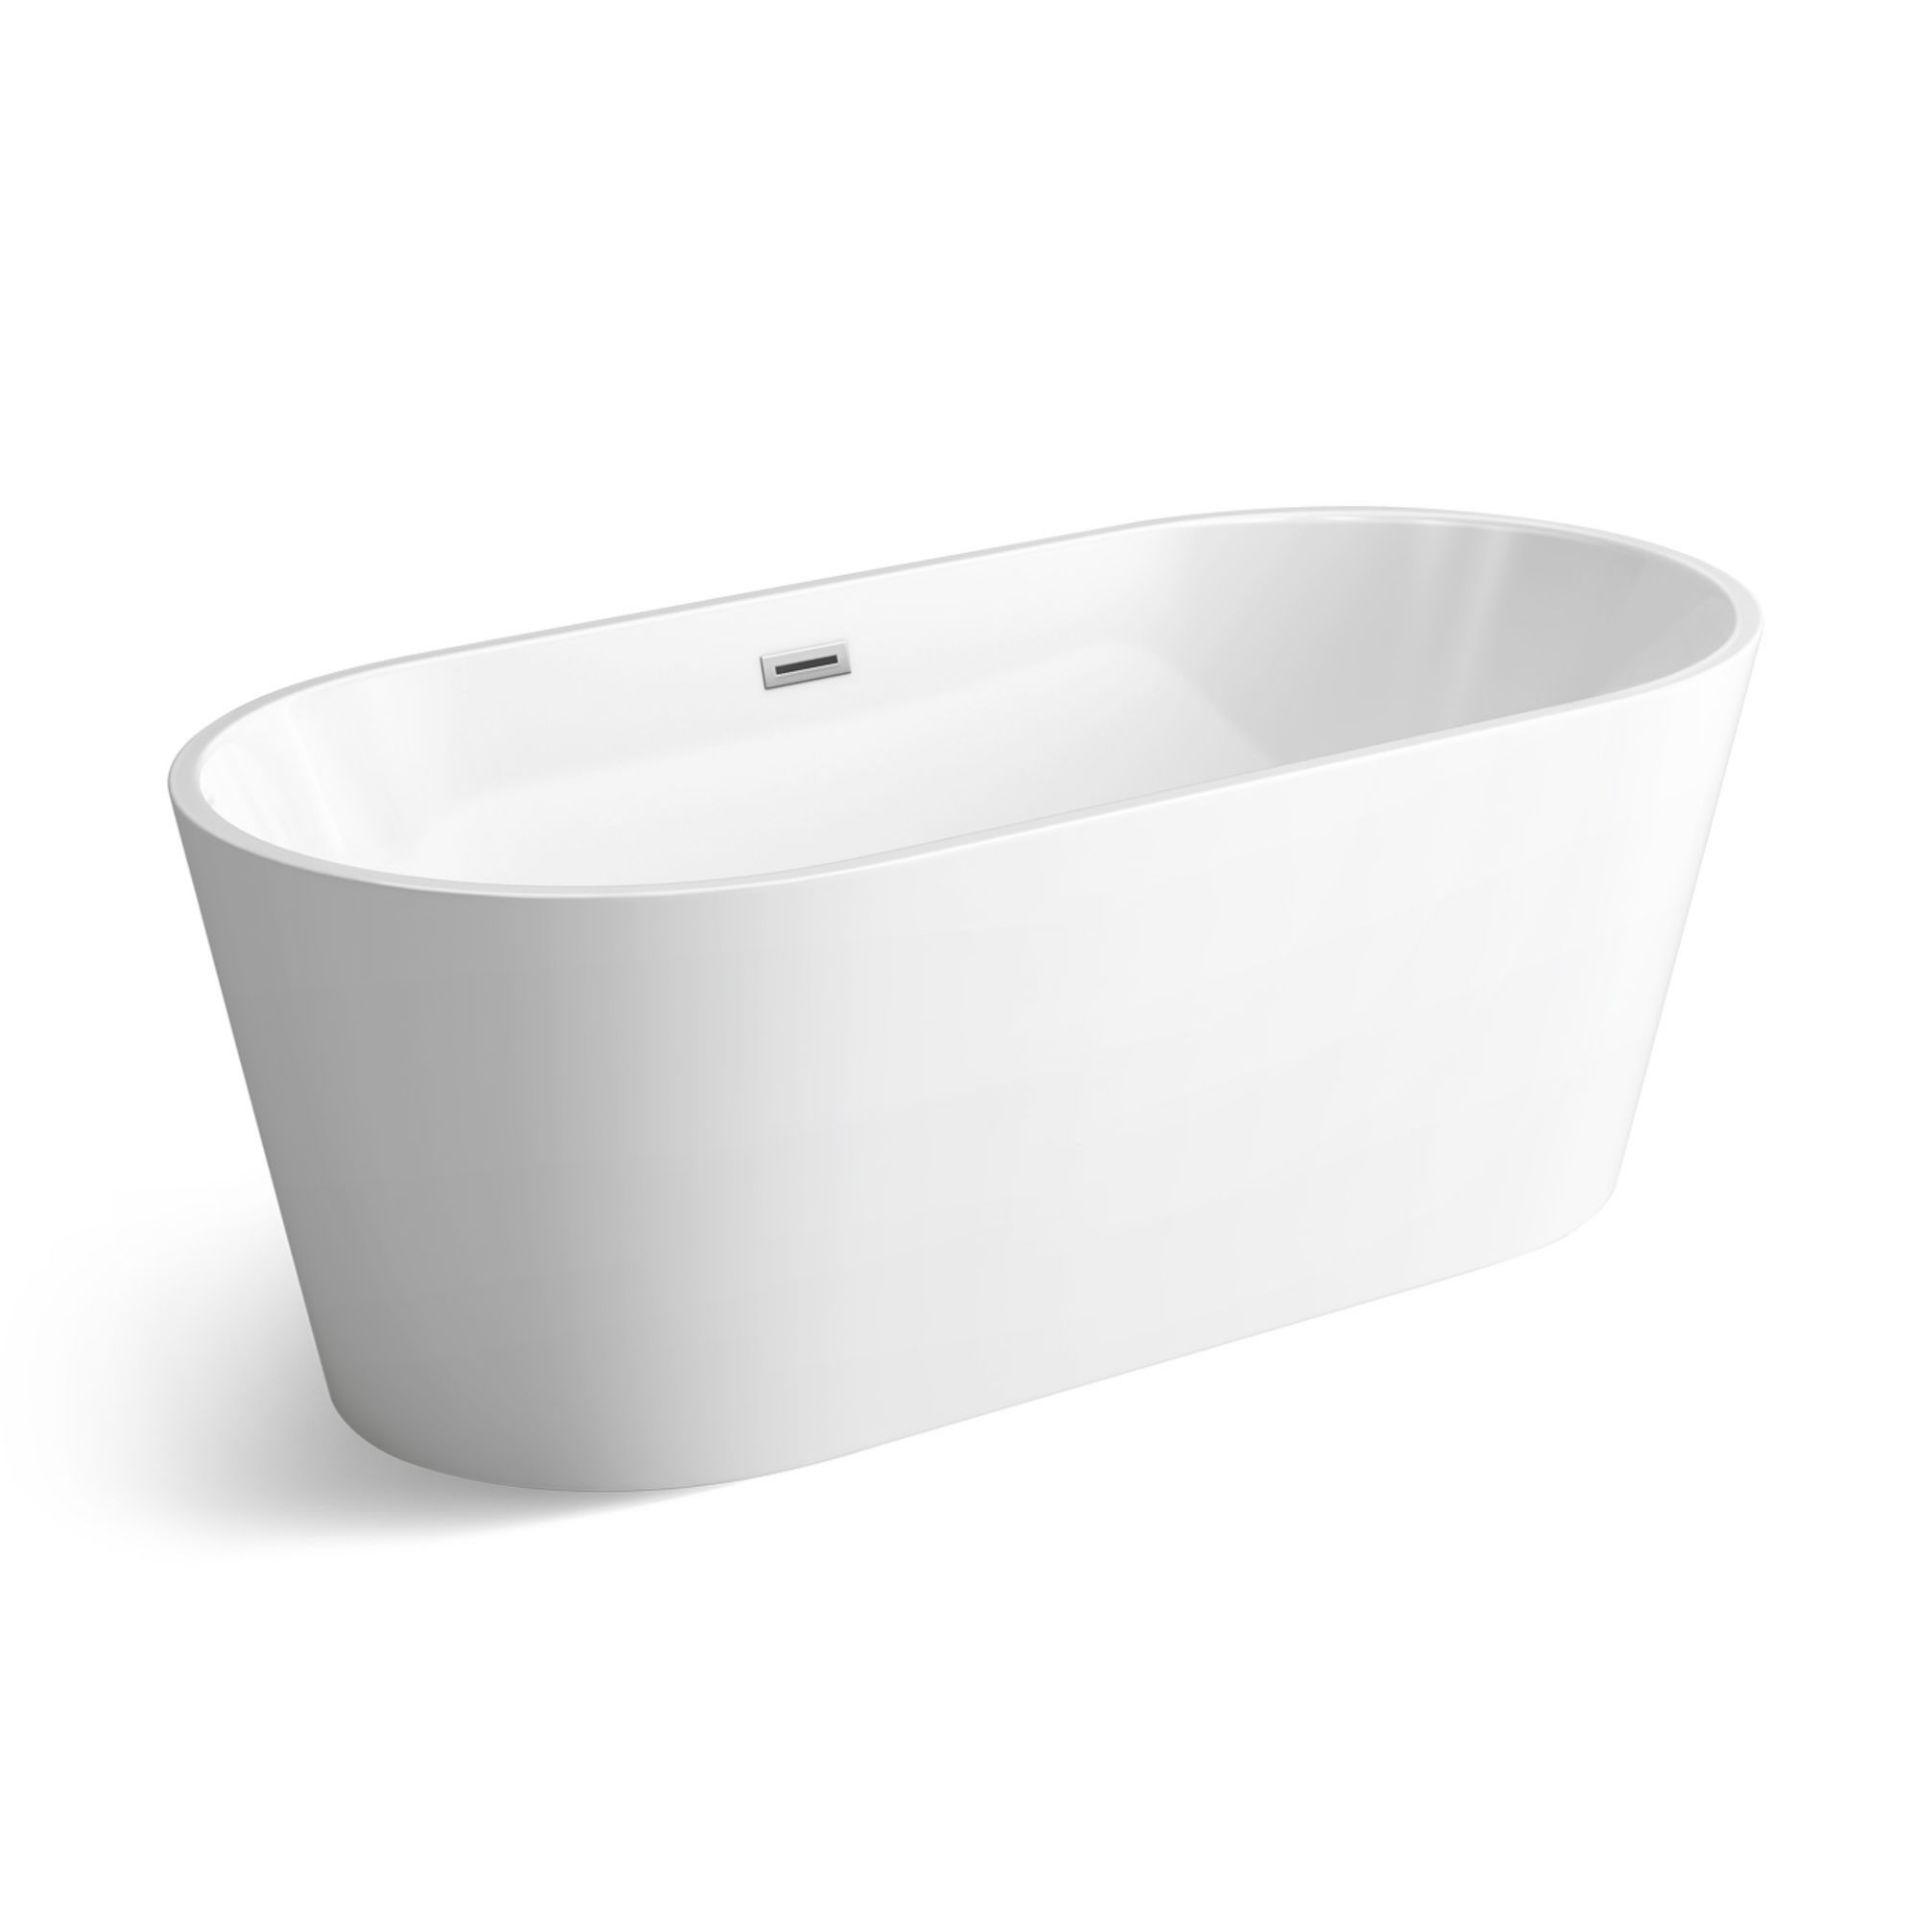 (DK2) 1700x800mm Ava Slimline Freestanding Bath. Manufactured from High Quality - Image 5 of 6